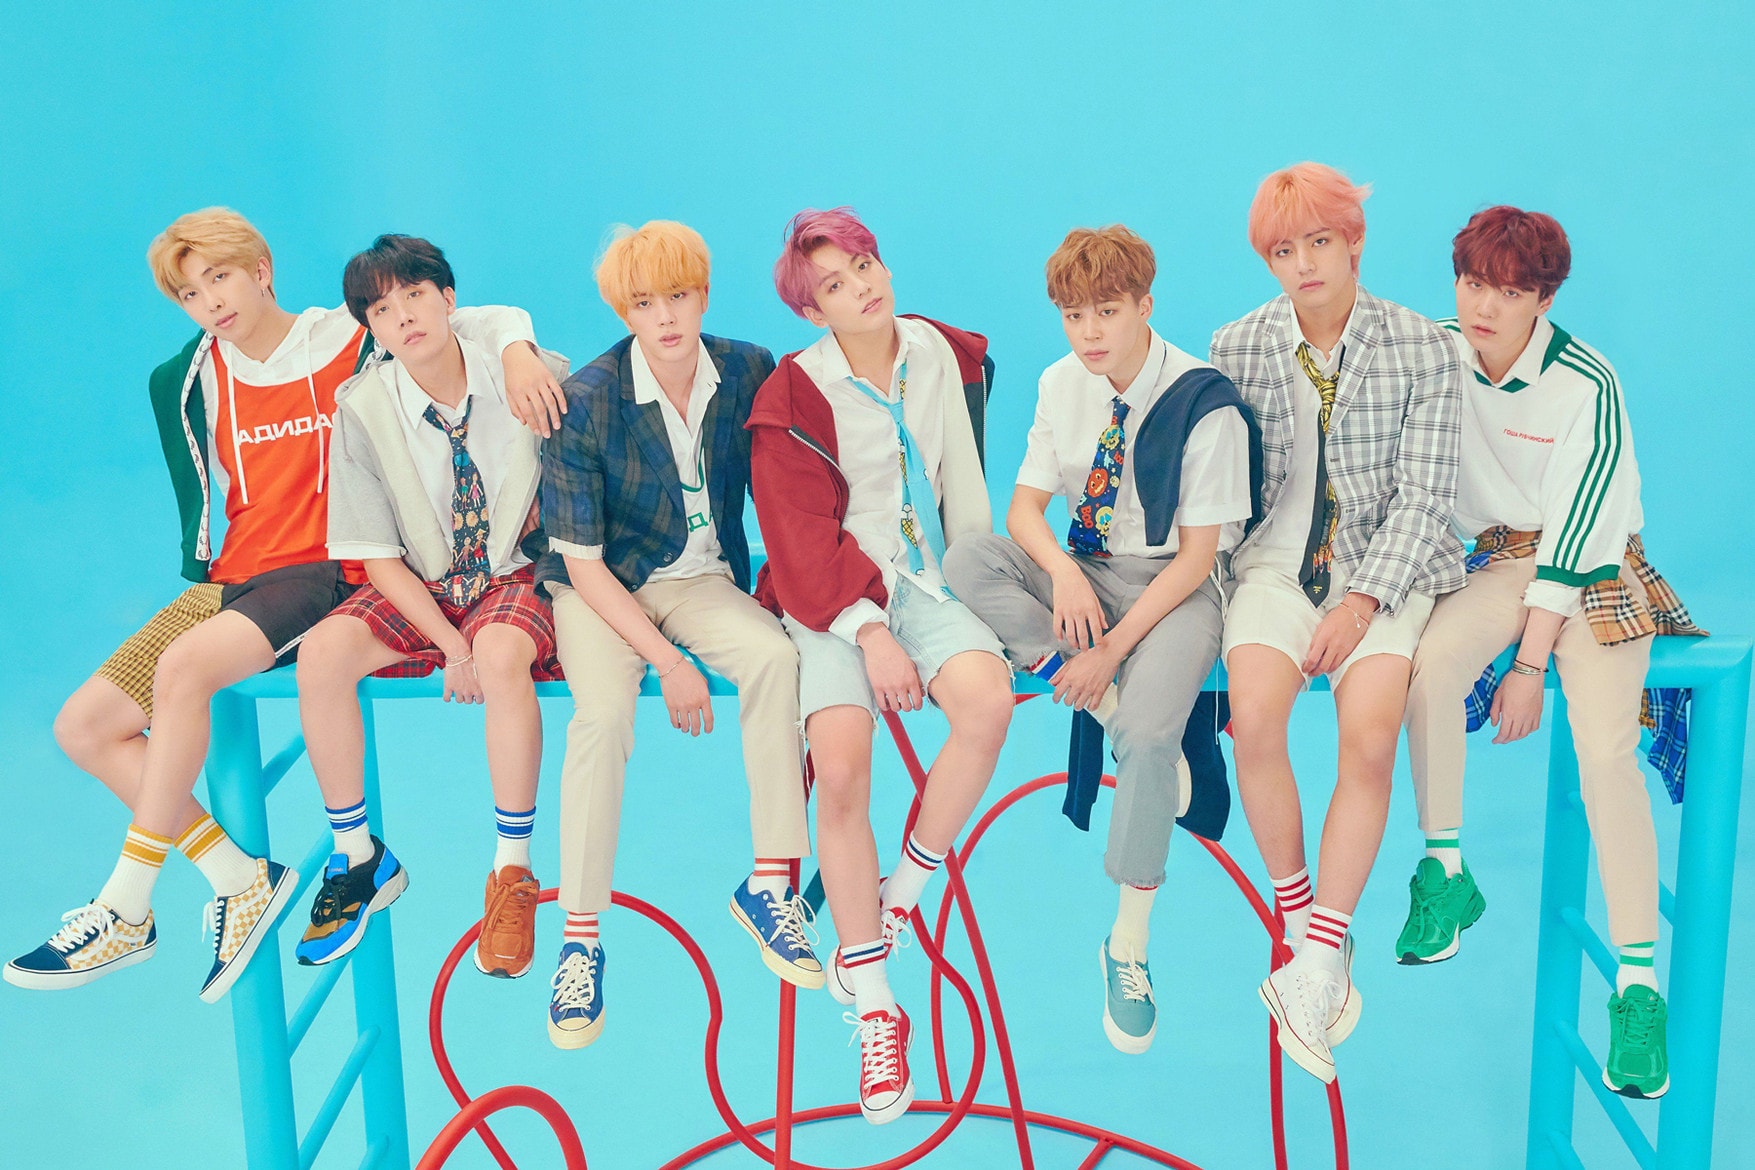 Louis Vuitton Reveals New Video With BTS as Special Guests for